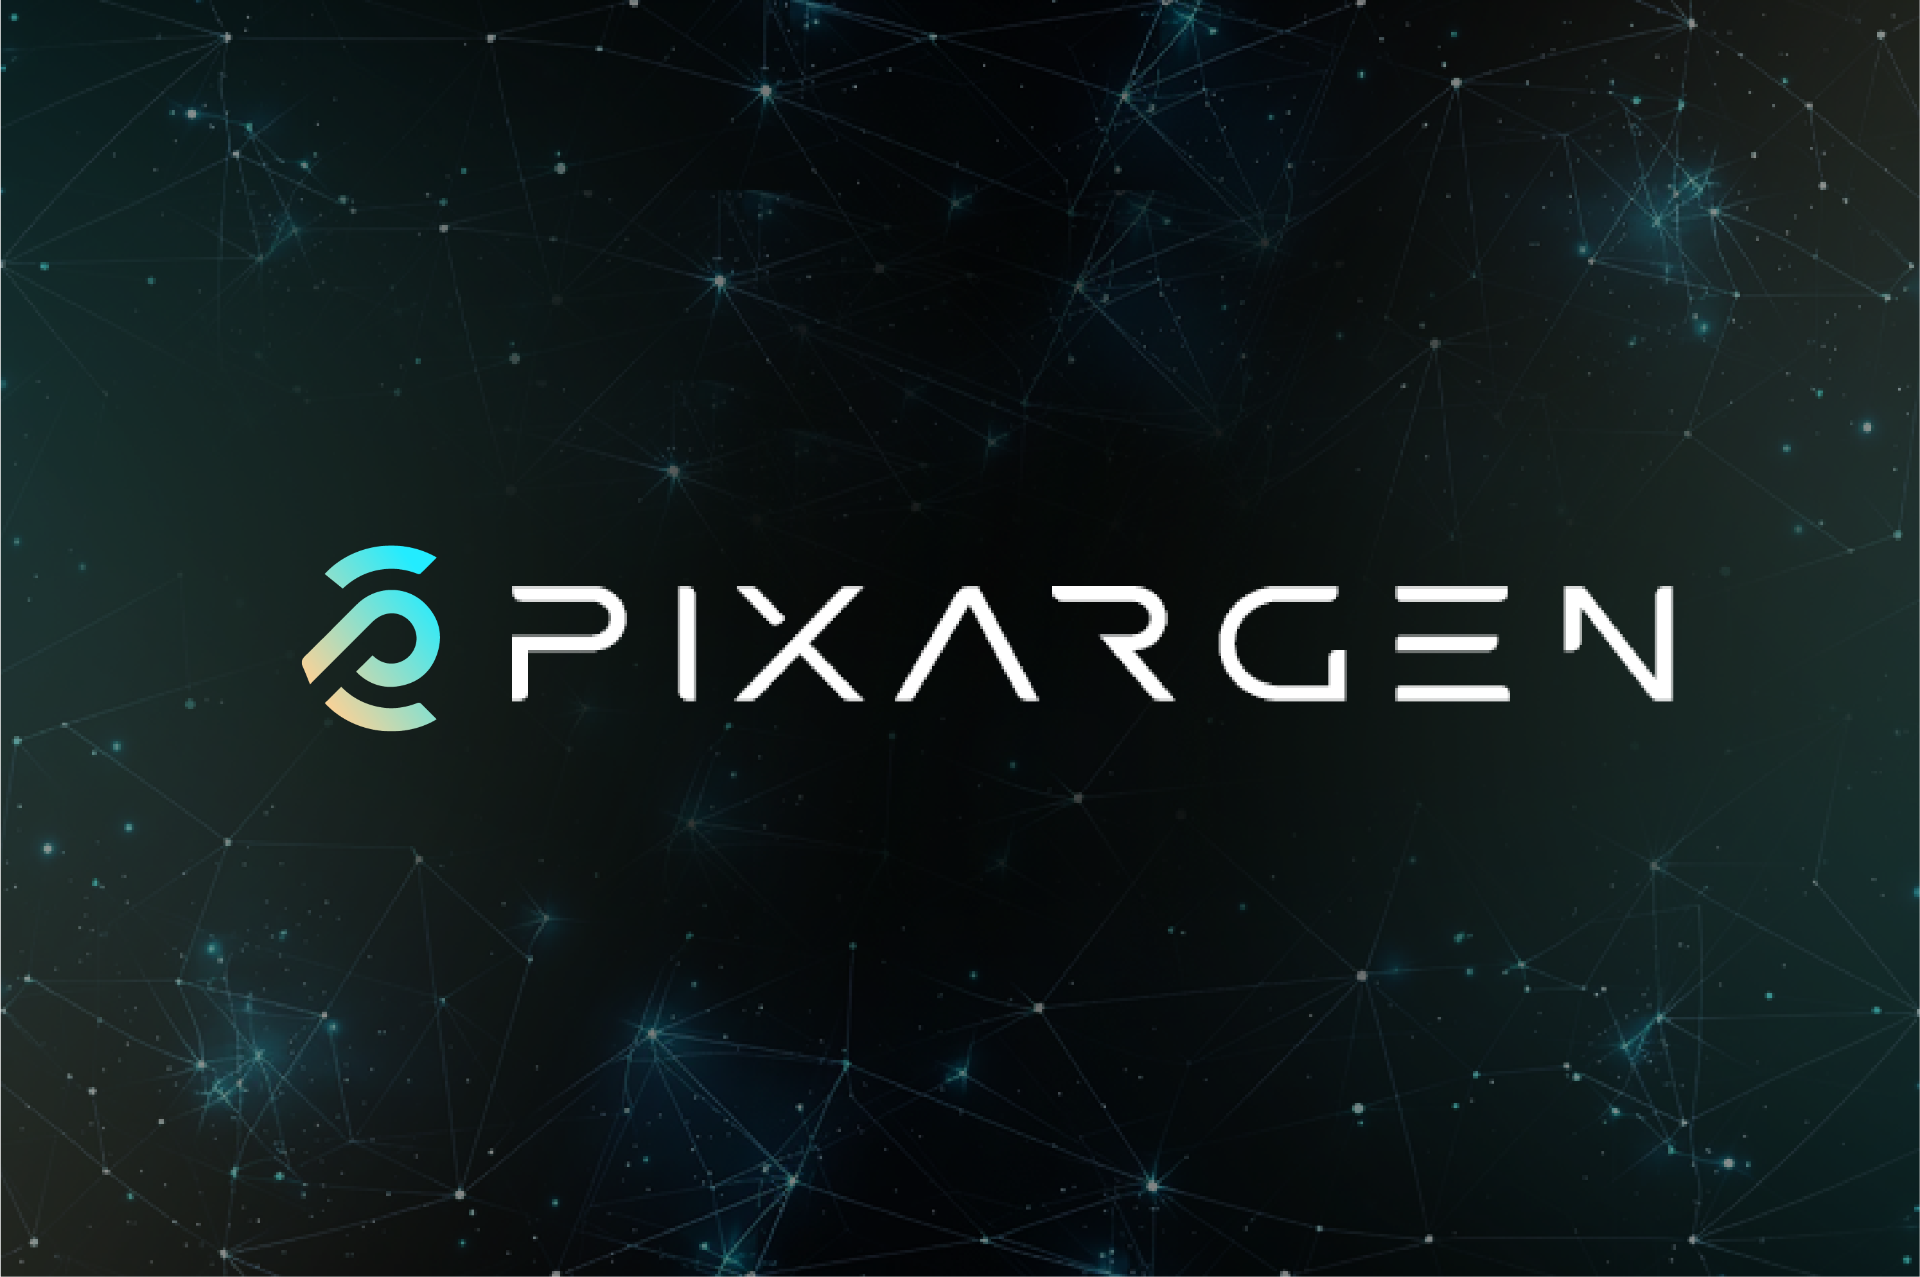 Pixargen's Debut in the AI and Digital Art Scene King NewsWire